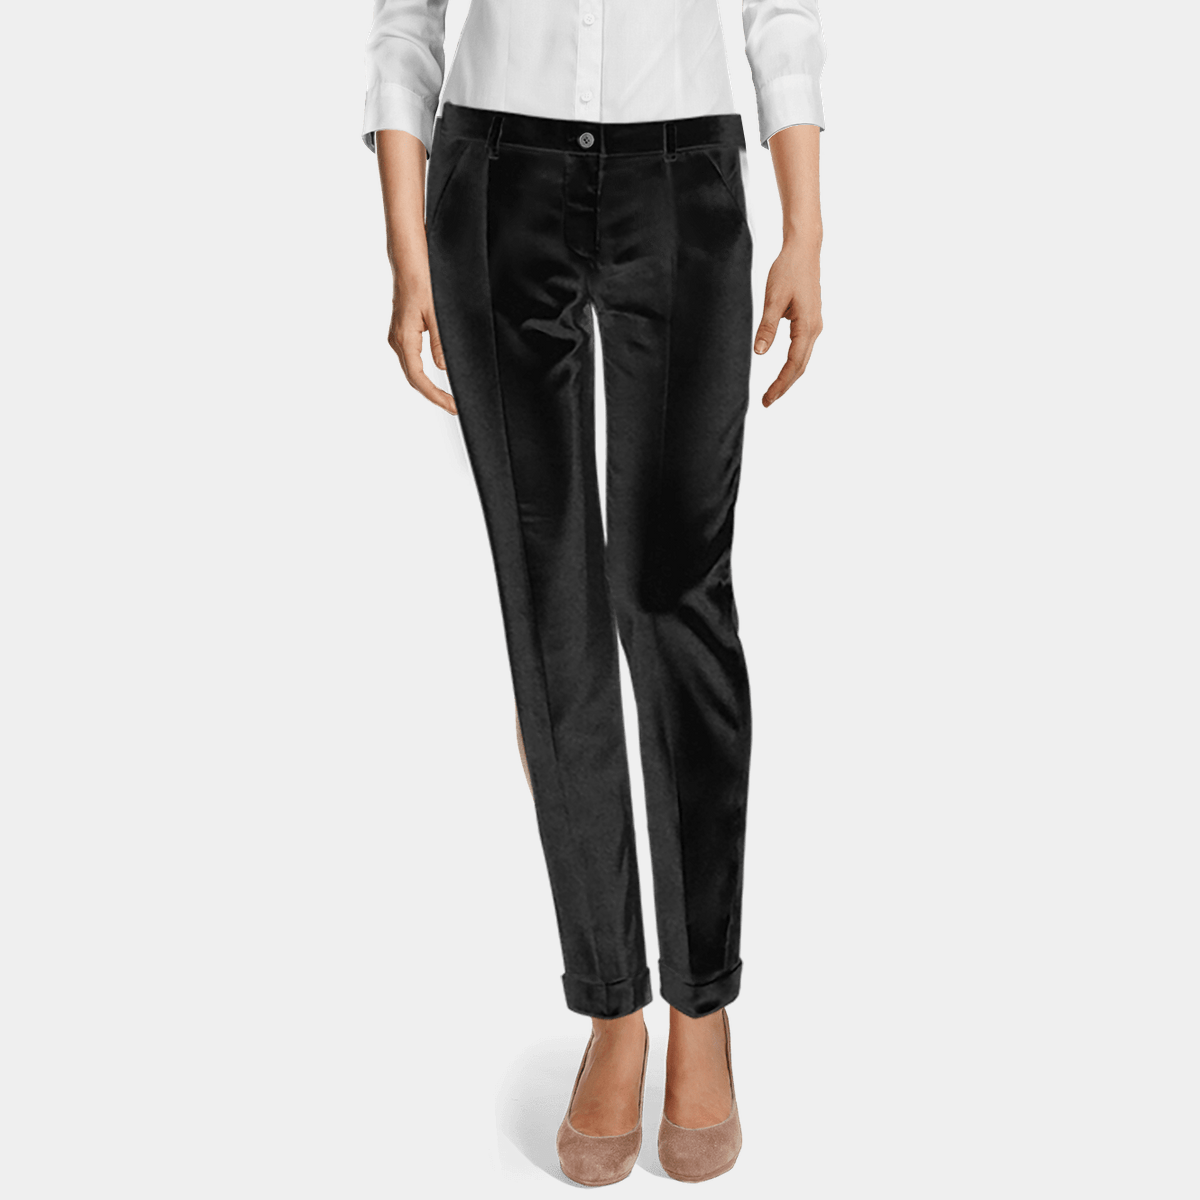 Onyx black velvet low waisted pleated cuffed Cigarette Pants